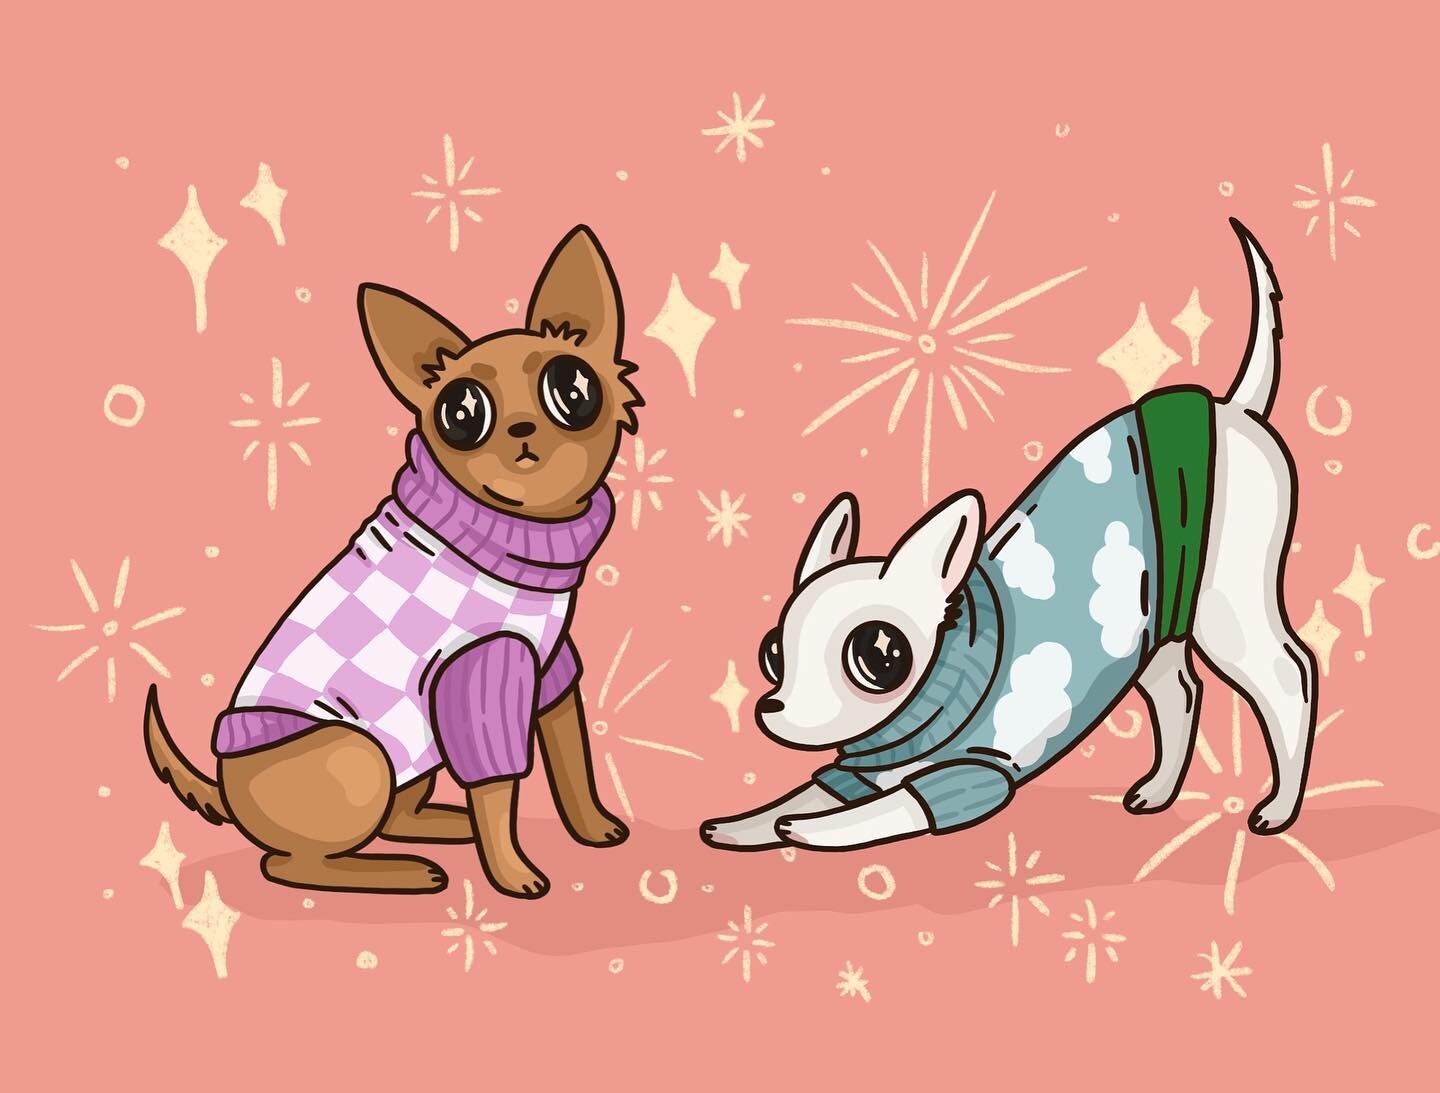 Some Christmas puppies to celebrate the holidays!! Phoebe is currently bundled up and got to play in some snow this morning :) she&rsquo;s been enjoying sitting by the fire and playing with my other dogs ✨ happy holidays friends!